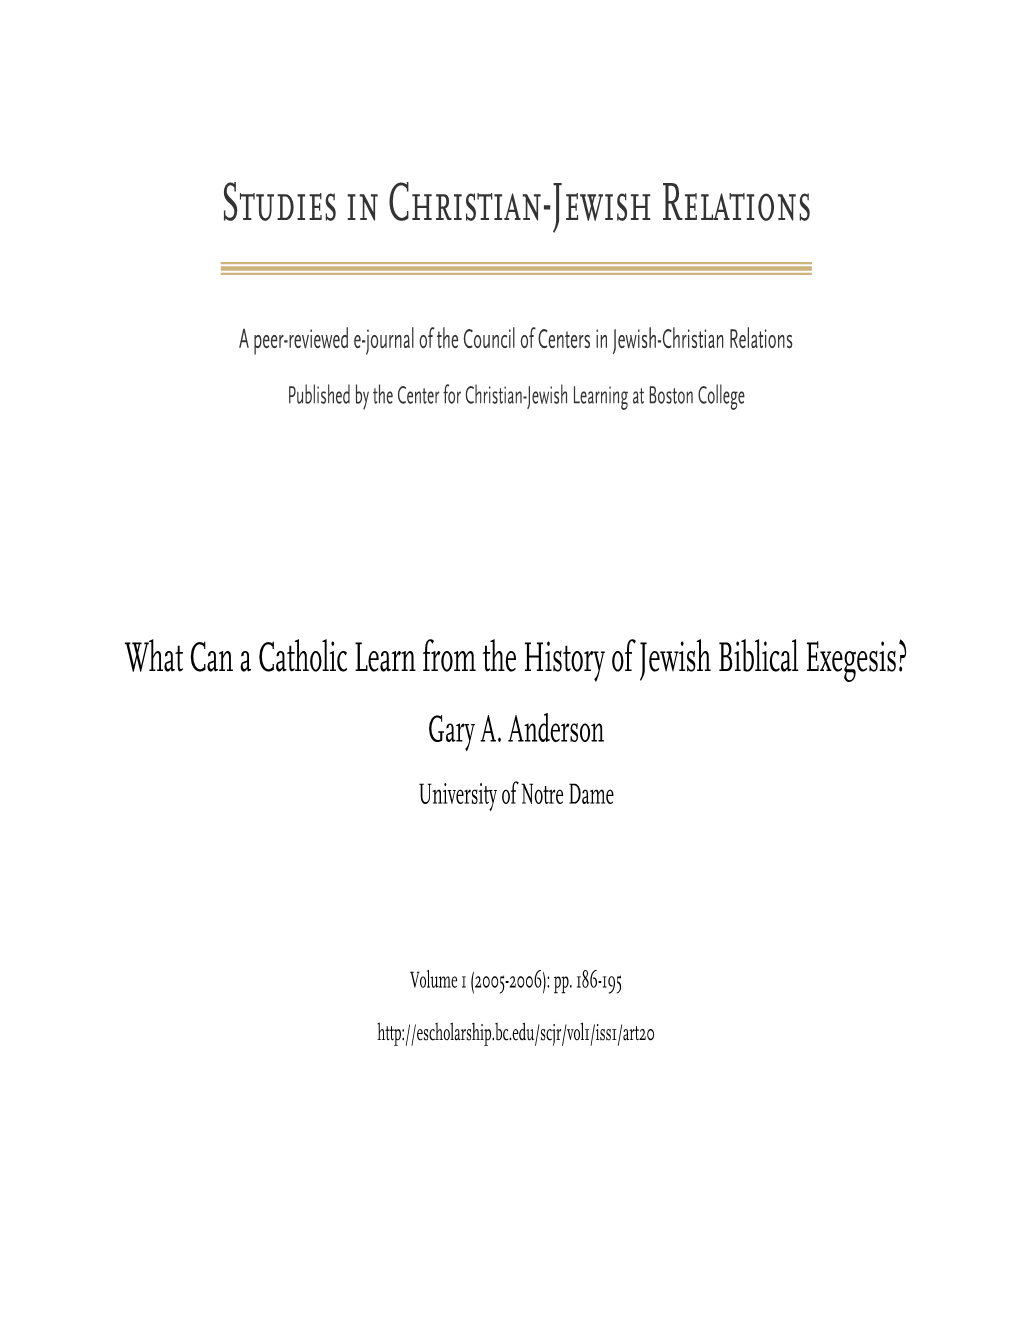 What Can a Catholic Learn from the History of Jewish Biblical Exegesis? Gary A